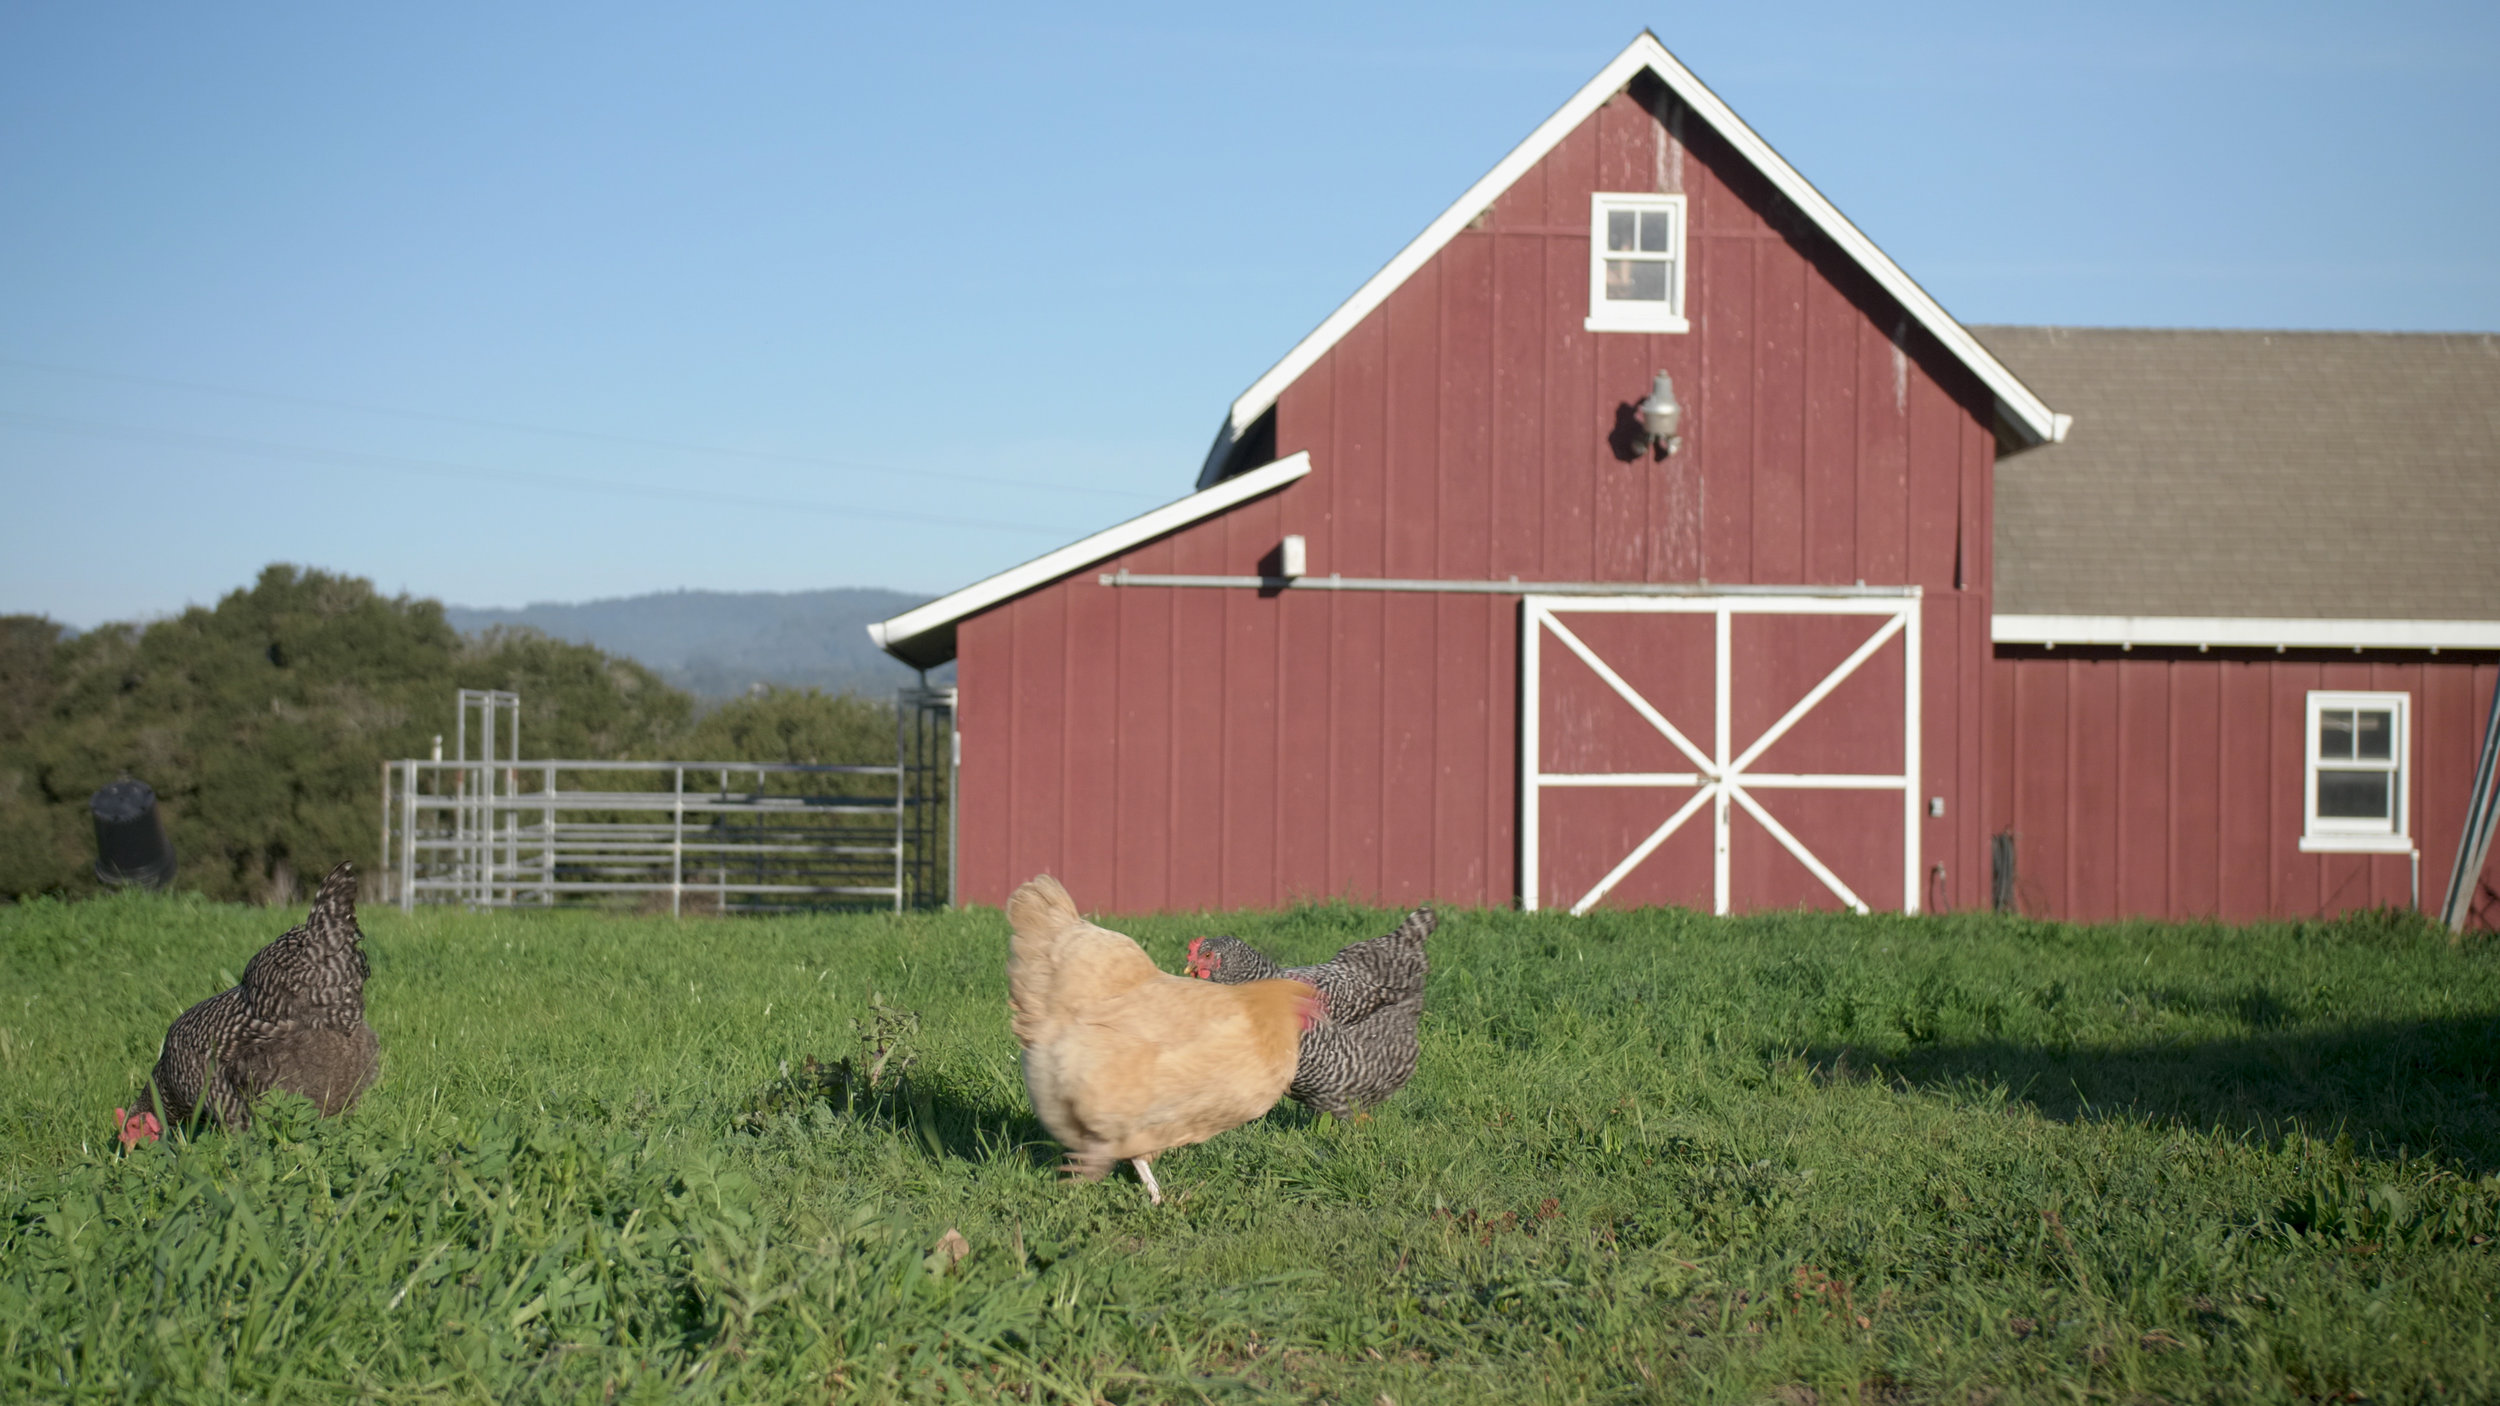 Chickens And A Barn.jpg